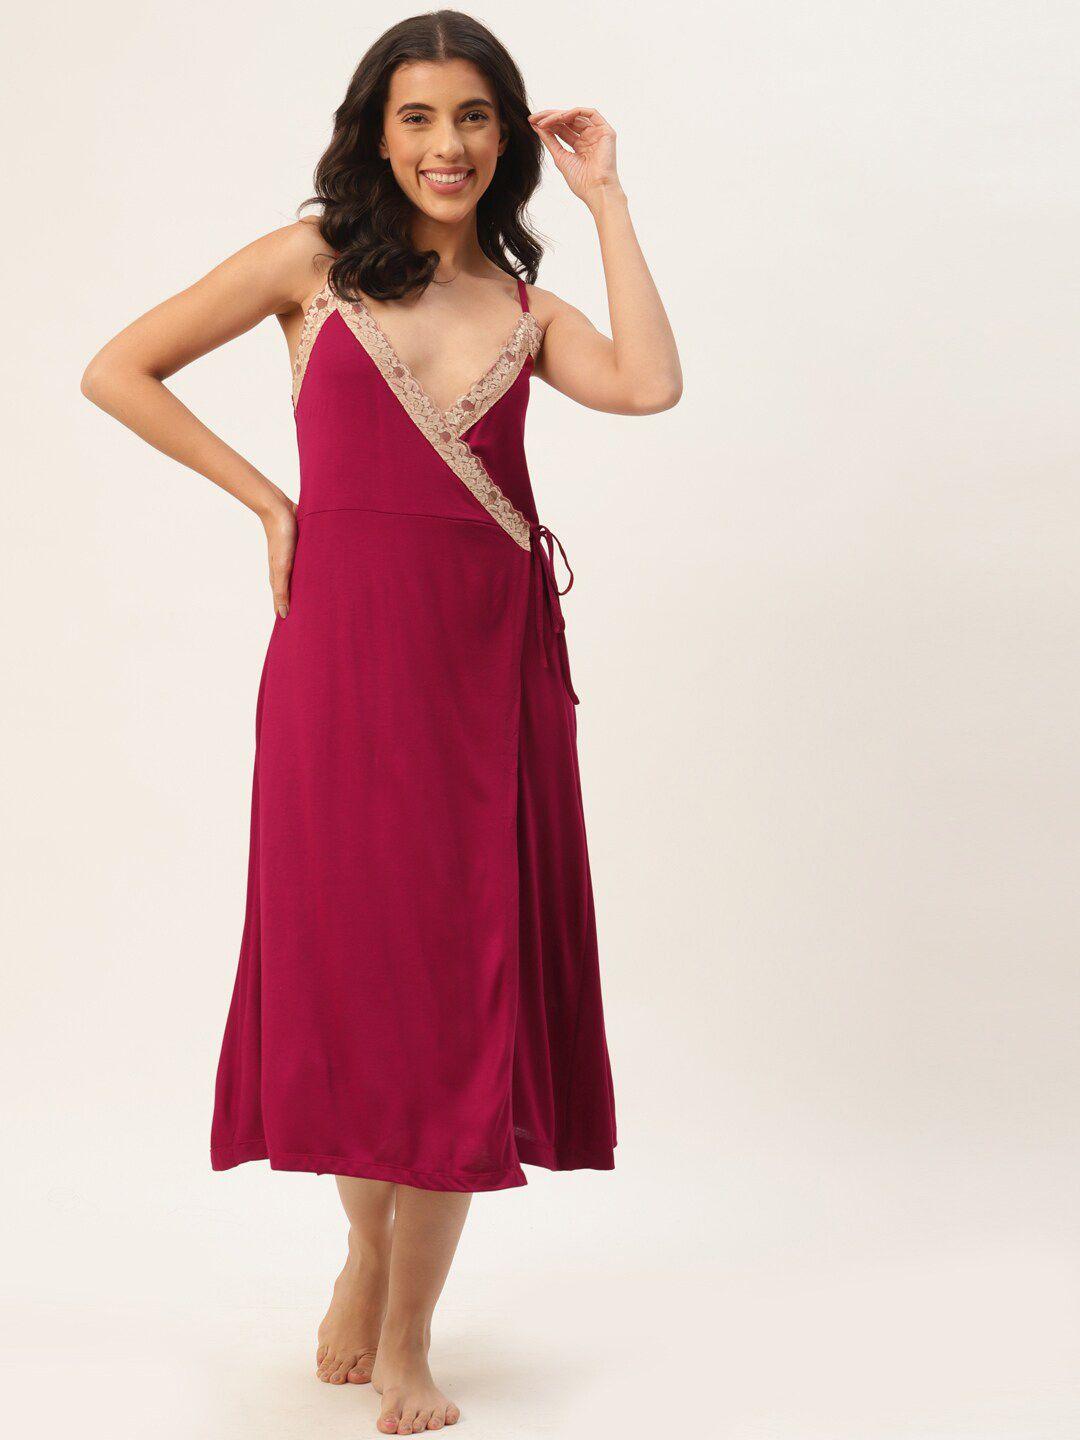 ms.lingies v neck lace up detail nightdress